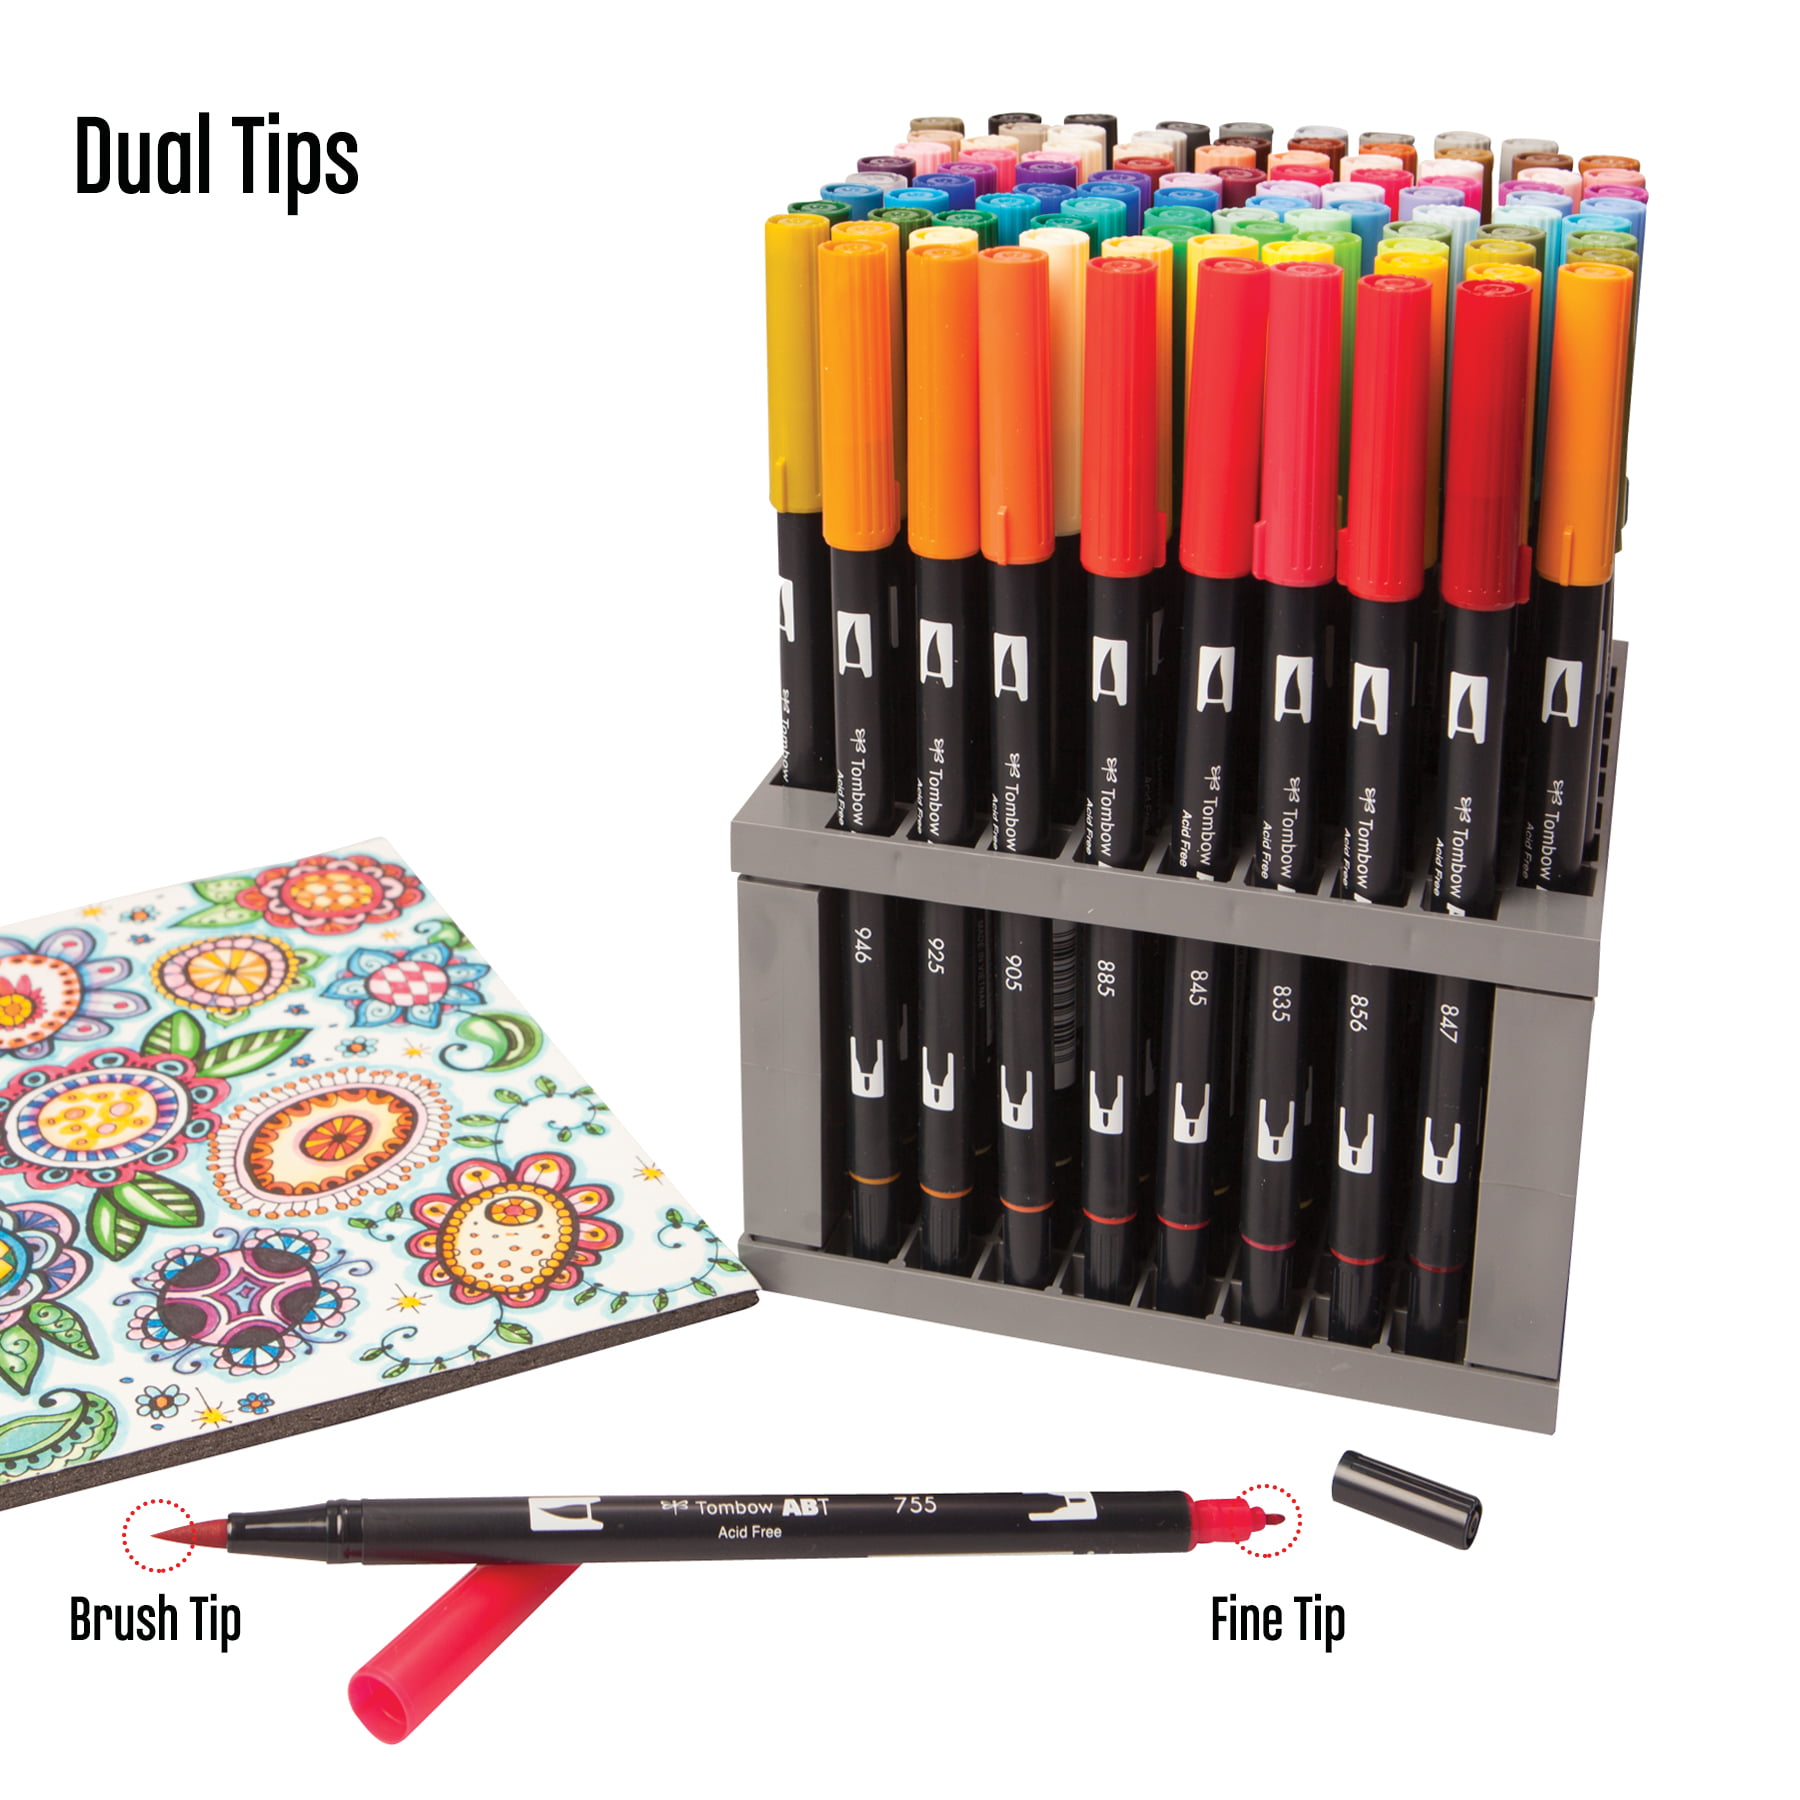 Tombow 56149 Dual Brush Pen Art Markers, 96 Color Set with Desk Stand.  Blendable, Brush and Fine Tip Markers with Stand